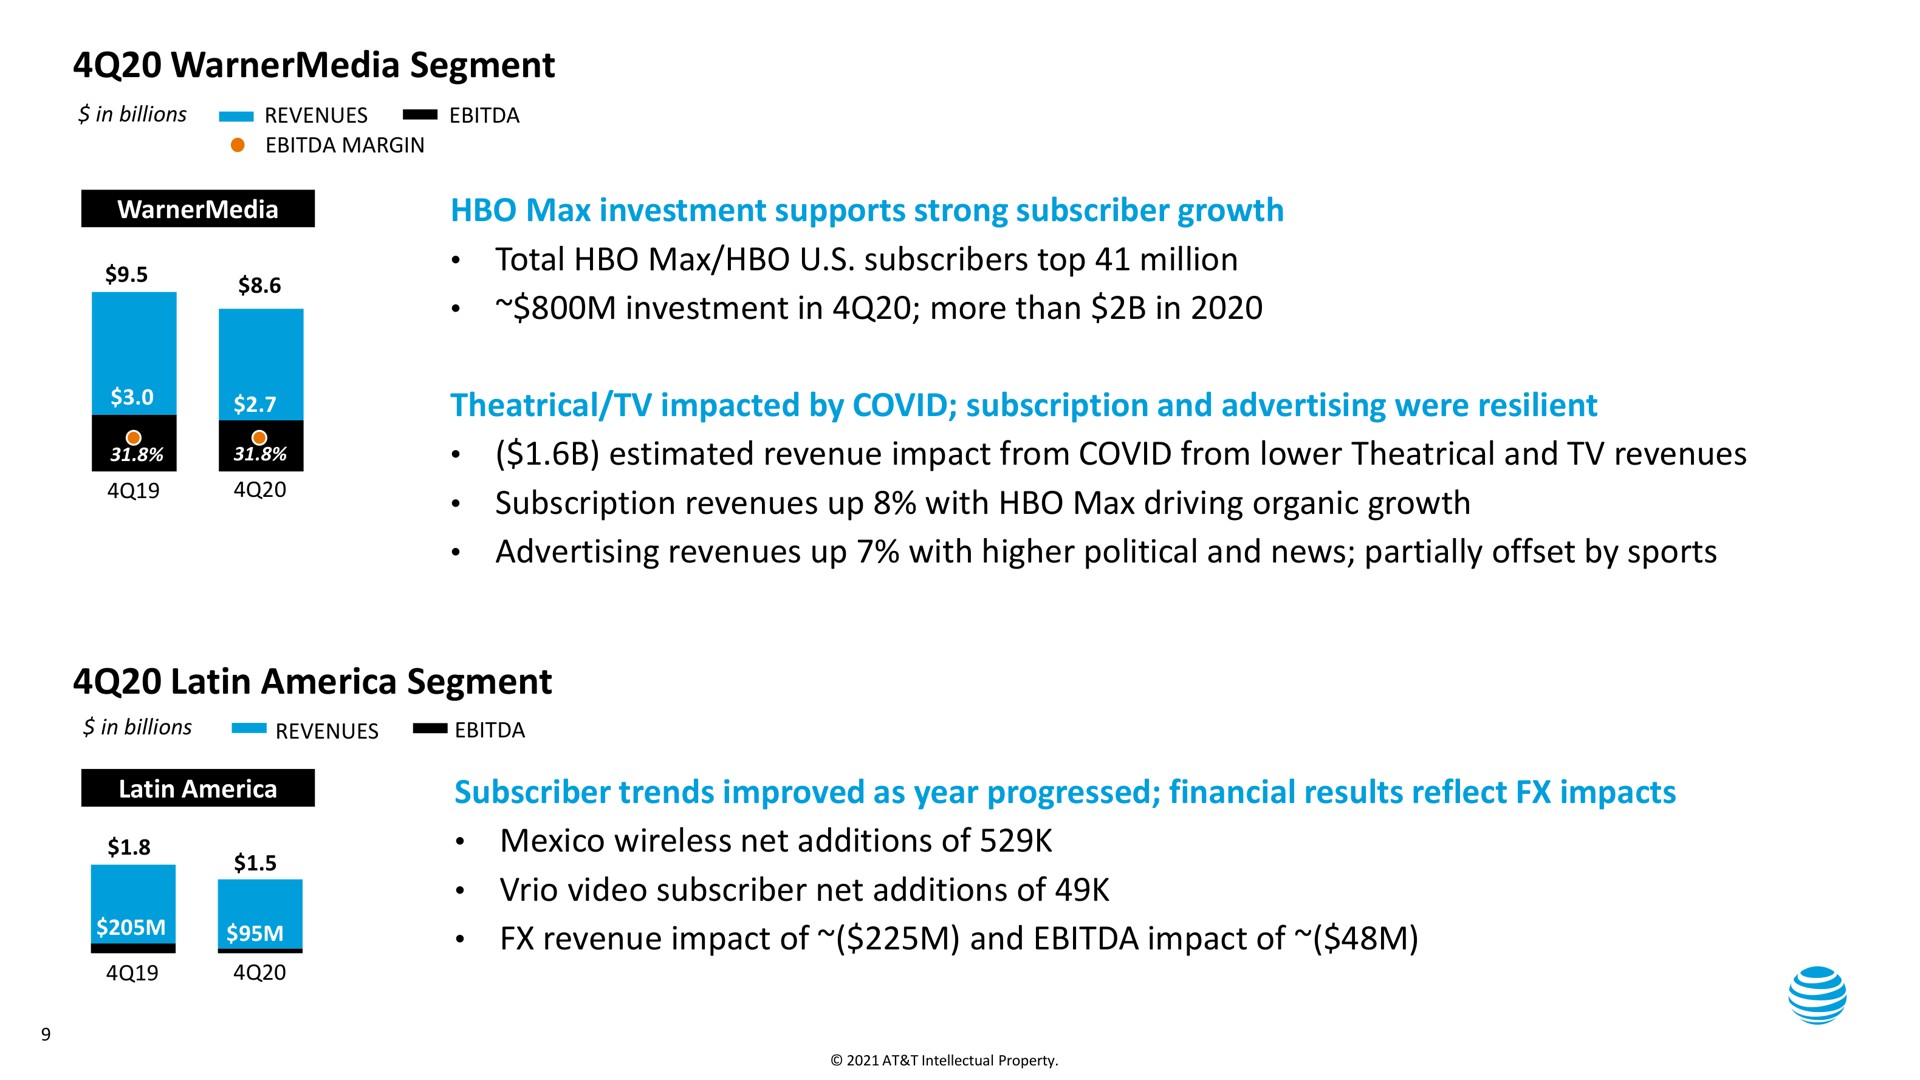 segment segment investment supports strong subscriber growth | AT&T